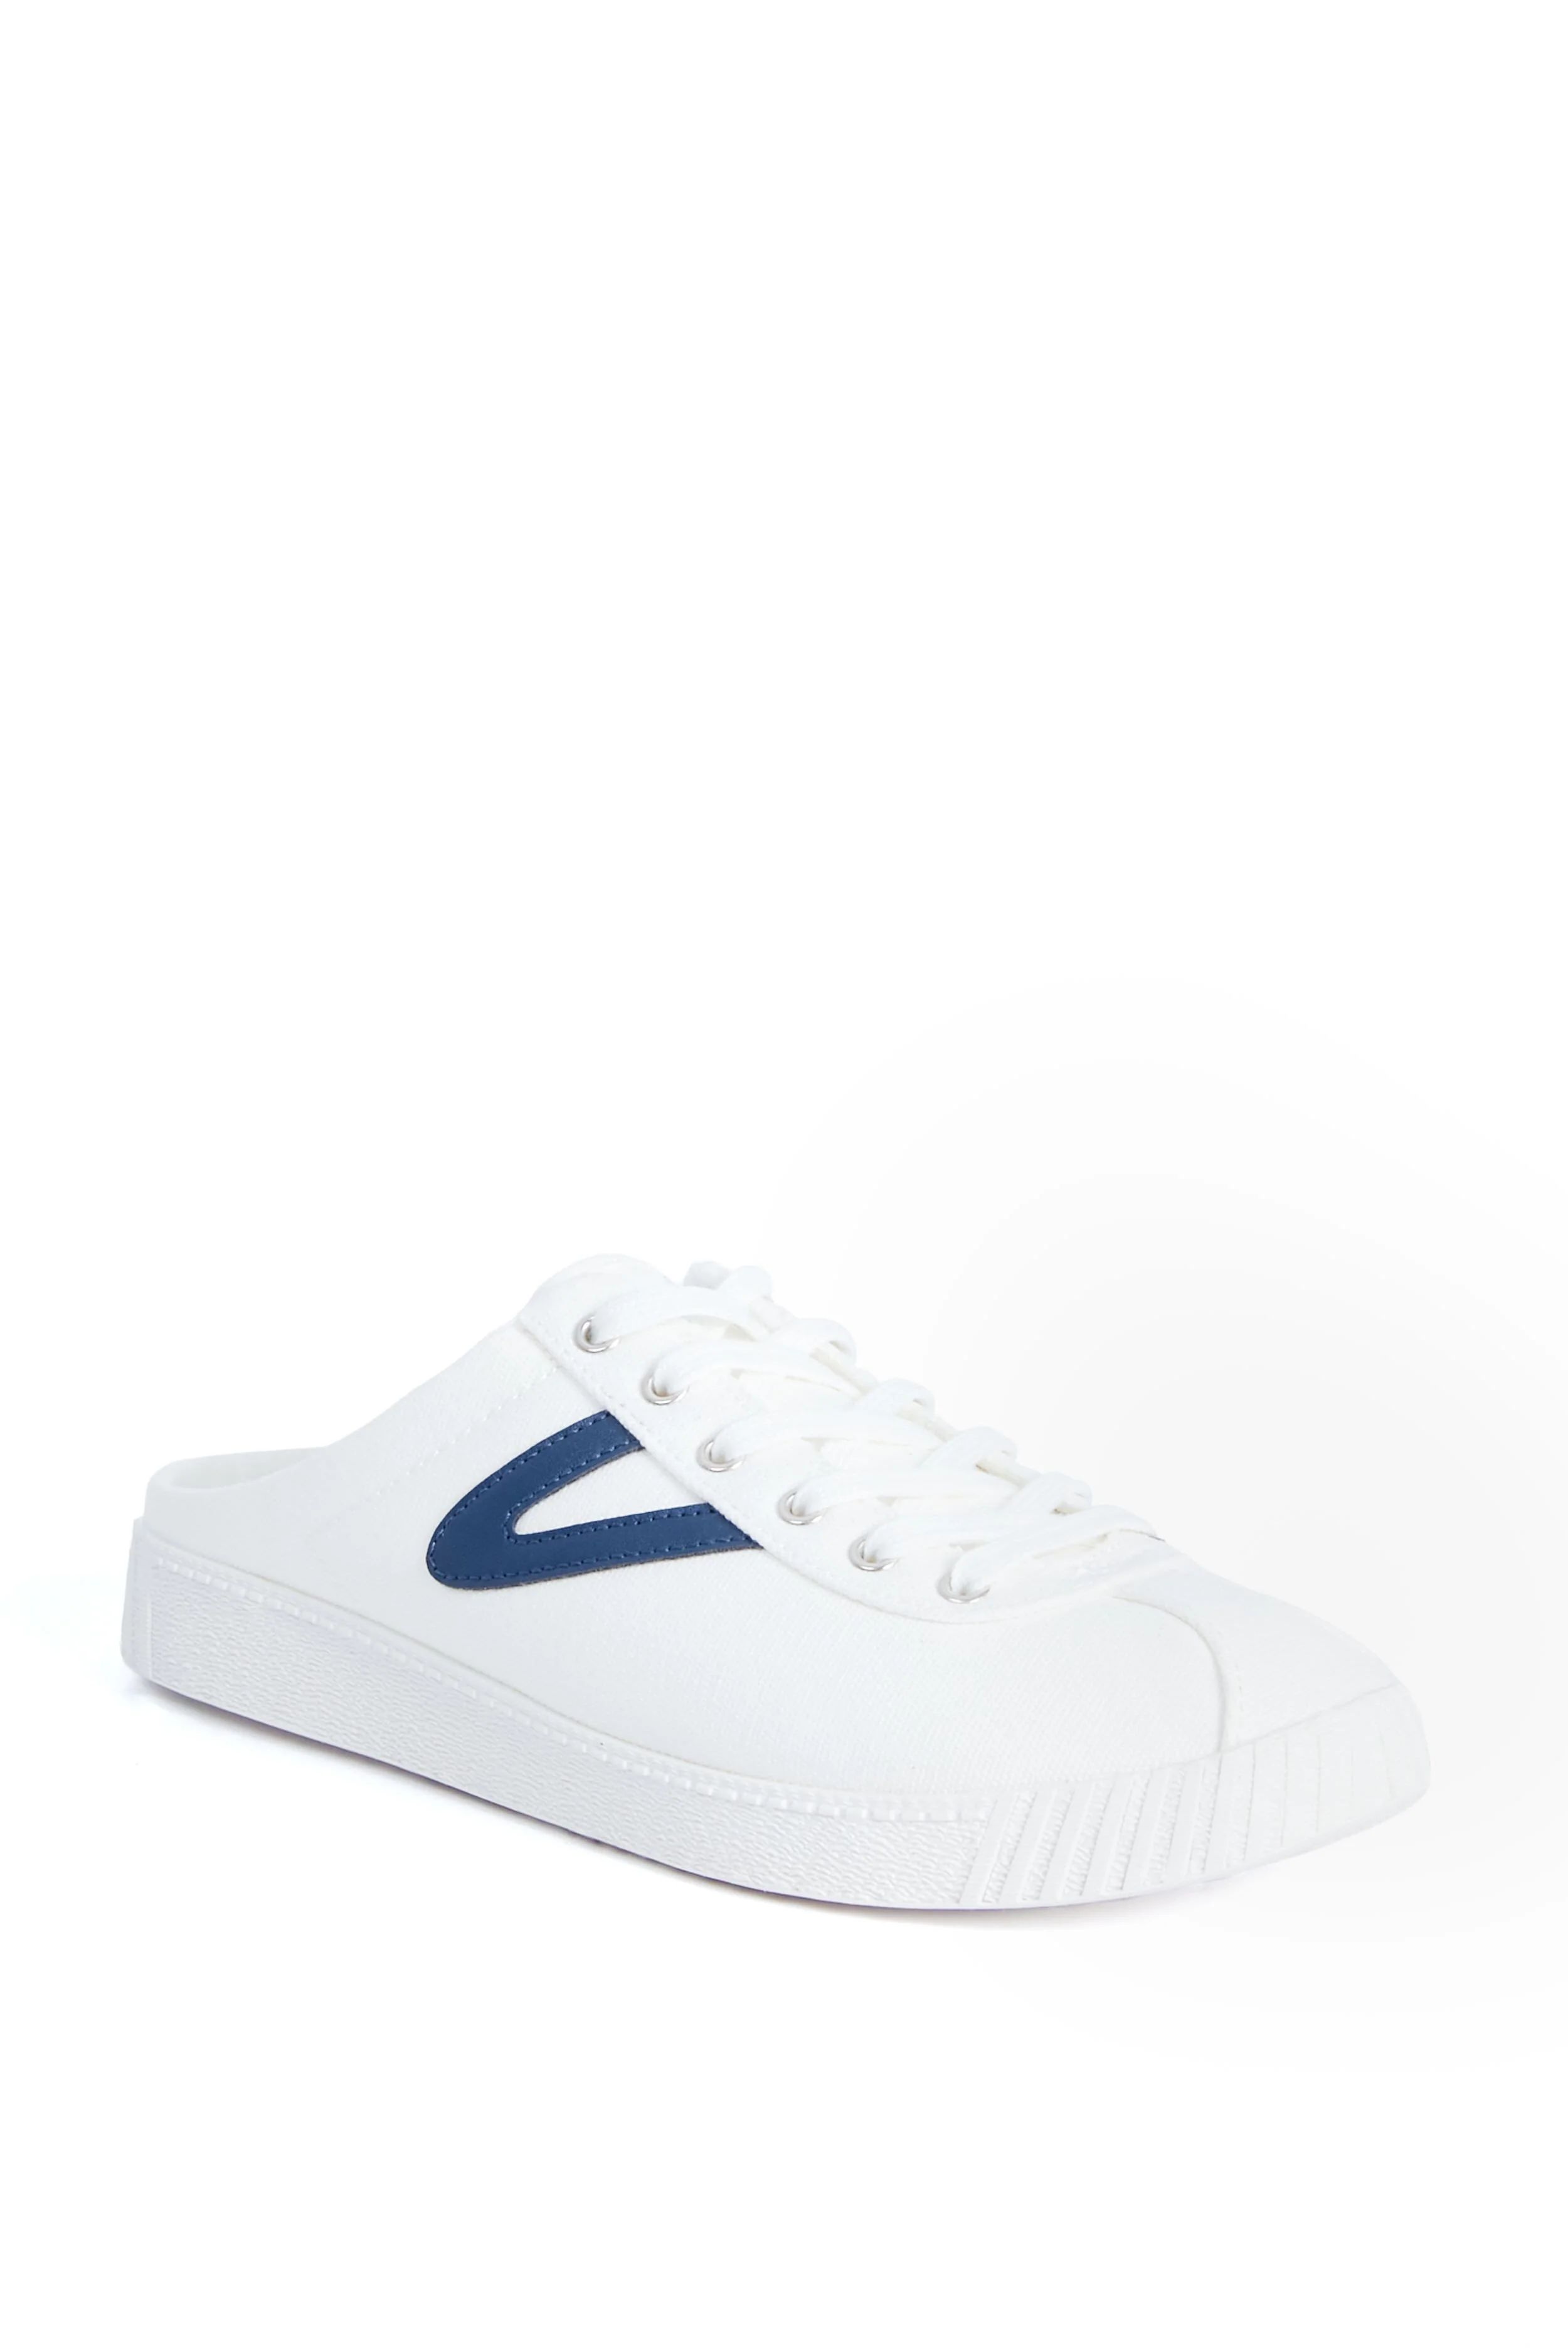 Women's White and Navy Easy Nylite Canvas Sneakers | Tuckernuck (US)